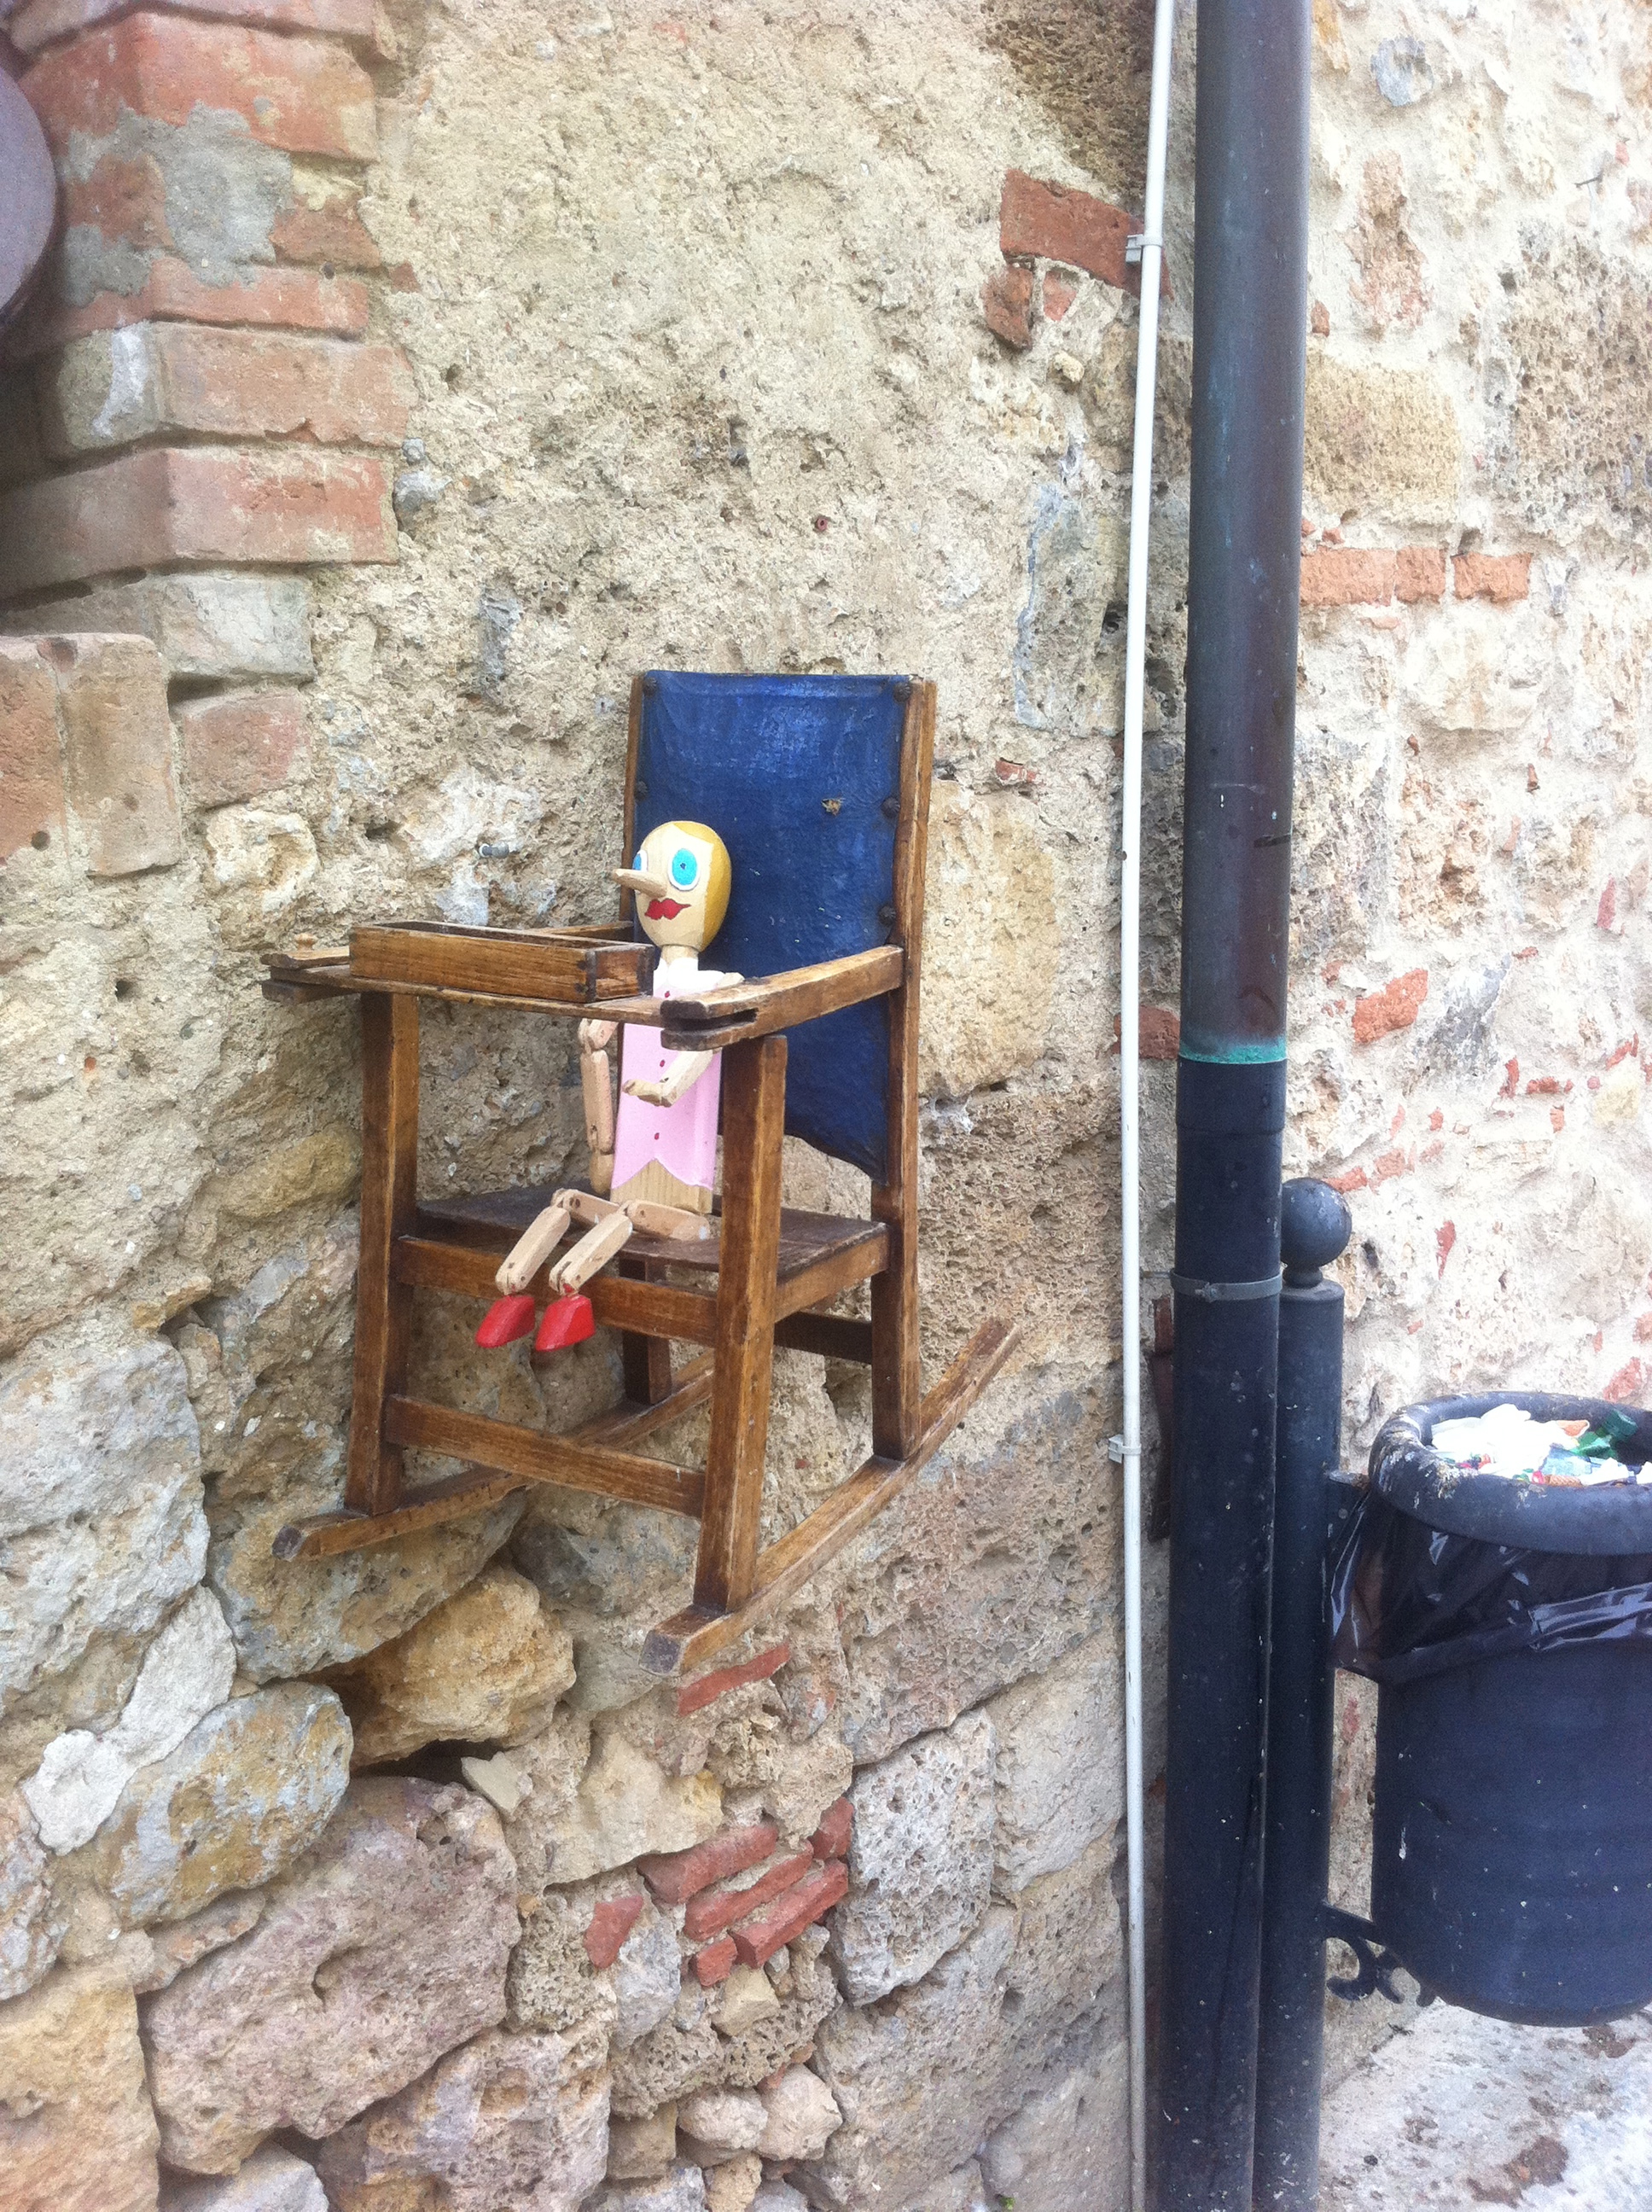 A beautiful medieval town with cobblestone, old shops, beautiful architecture, and this creepy thing. 